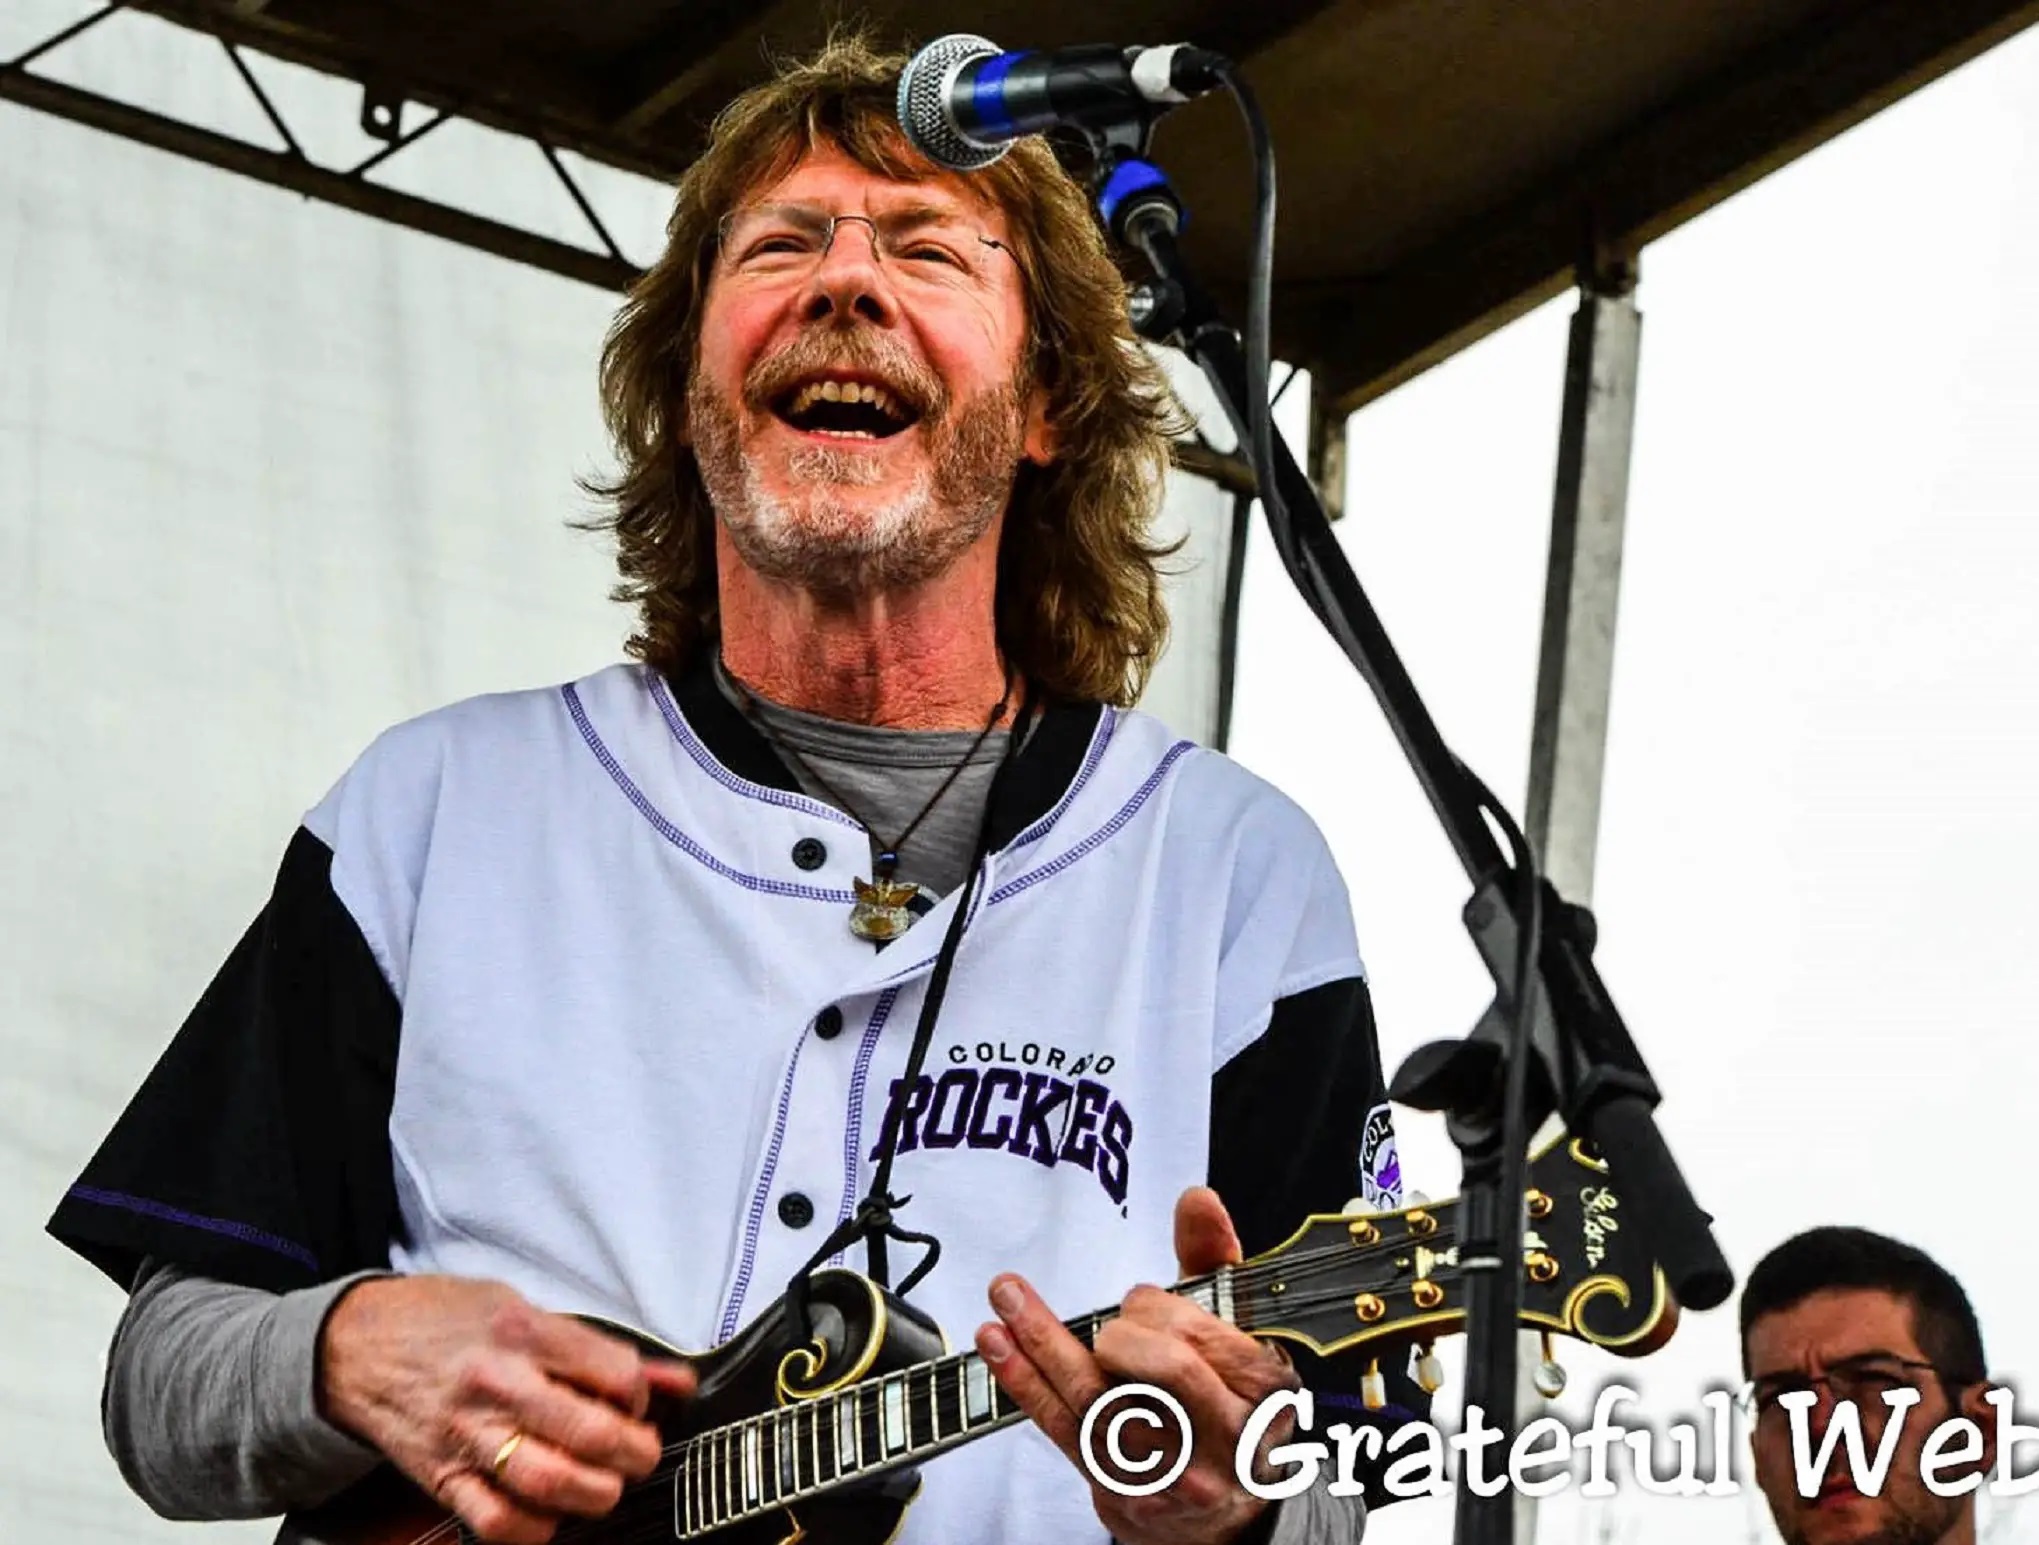 MUSIC WORCESTER PRESENTS SAM BUSH- "THE KING OF NEWGRASS" AT HANOVER THEATRE JUNE 9